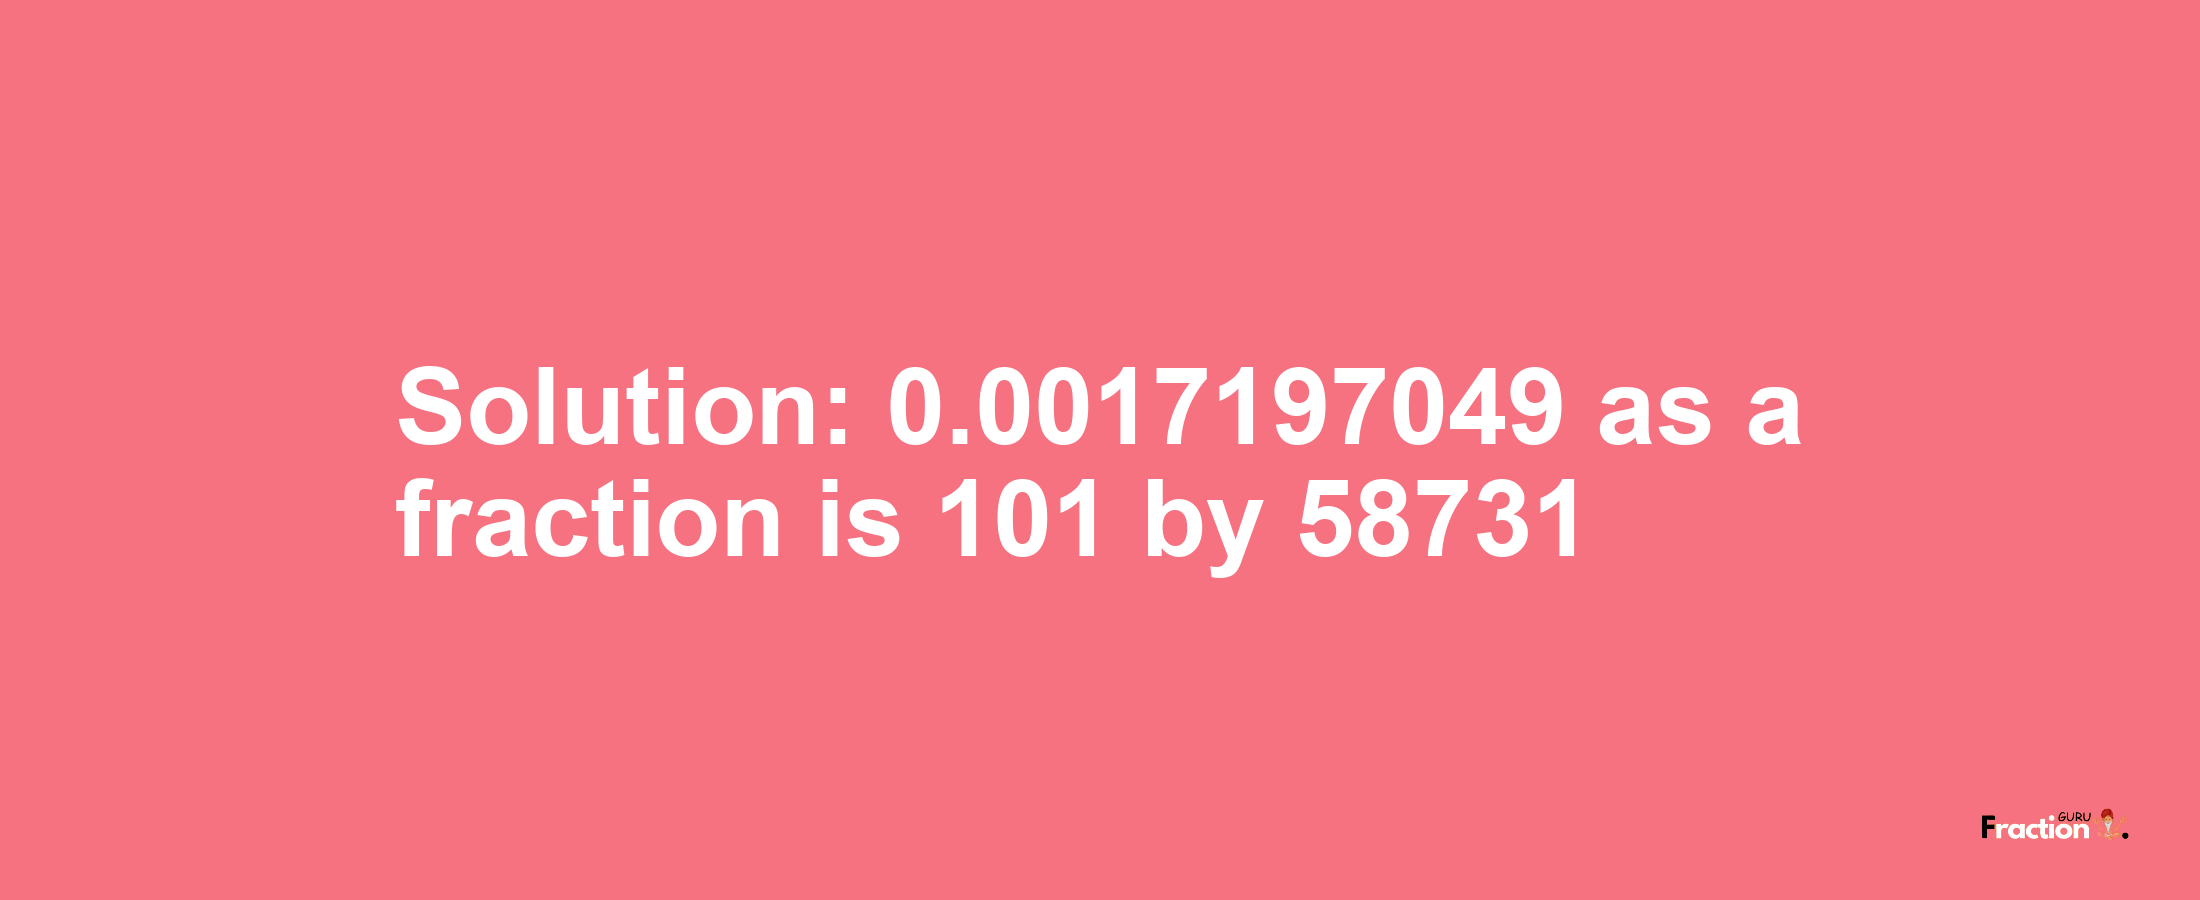 Solution:0.0017197049 as a fraction is 101/58731